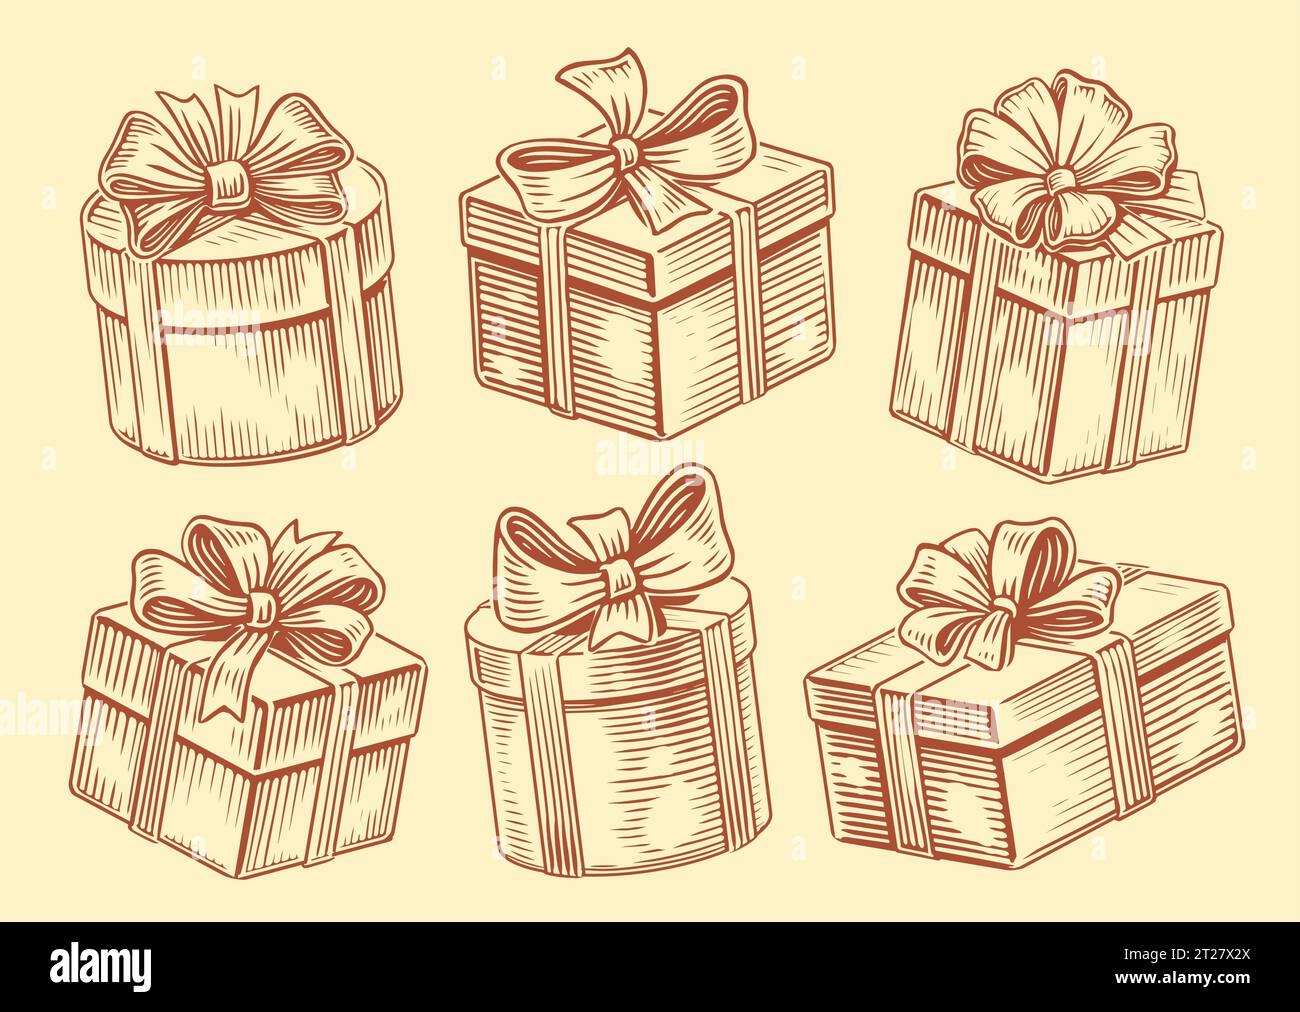 Set of Christmas gifts. Holiday gift box with ribbon bow. Vintage sketch vector illustration Stock Vector